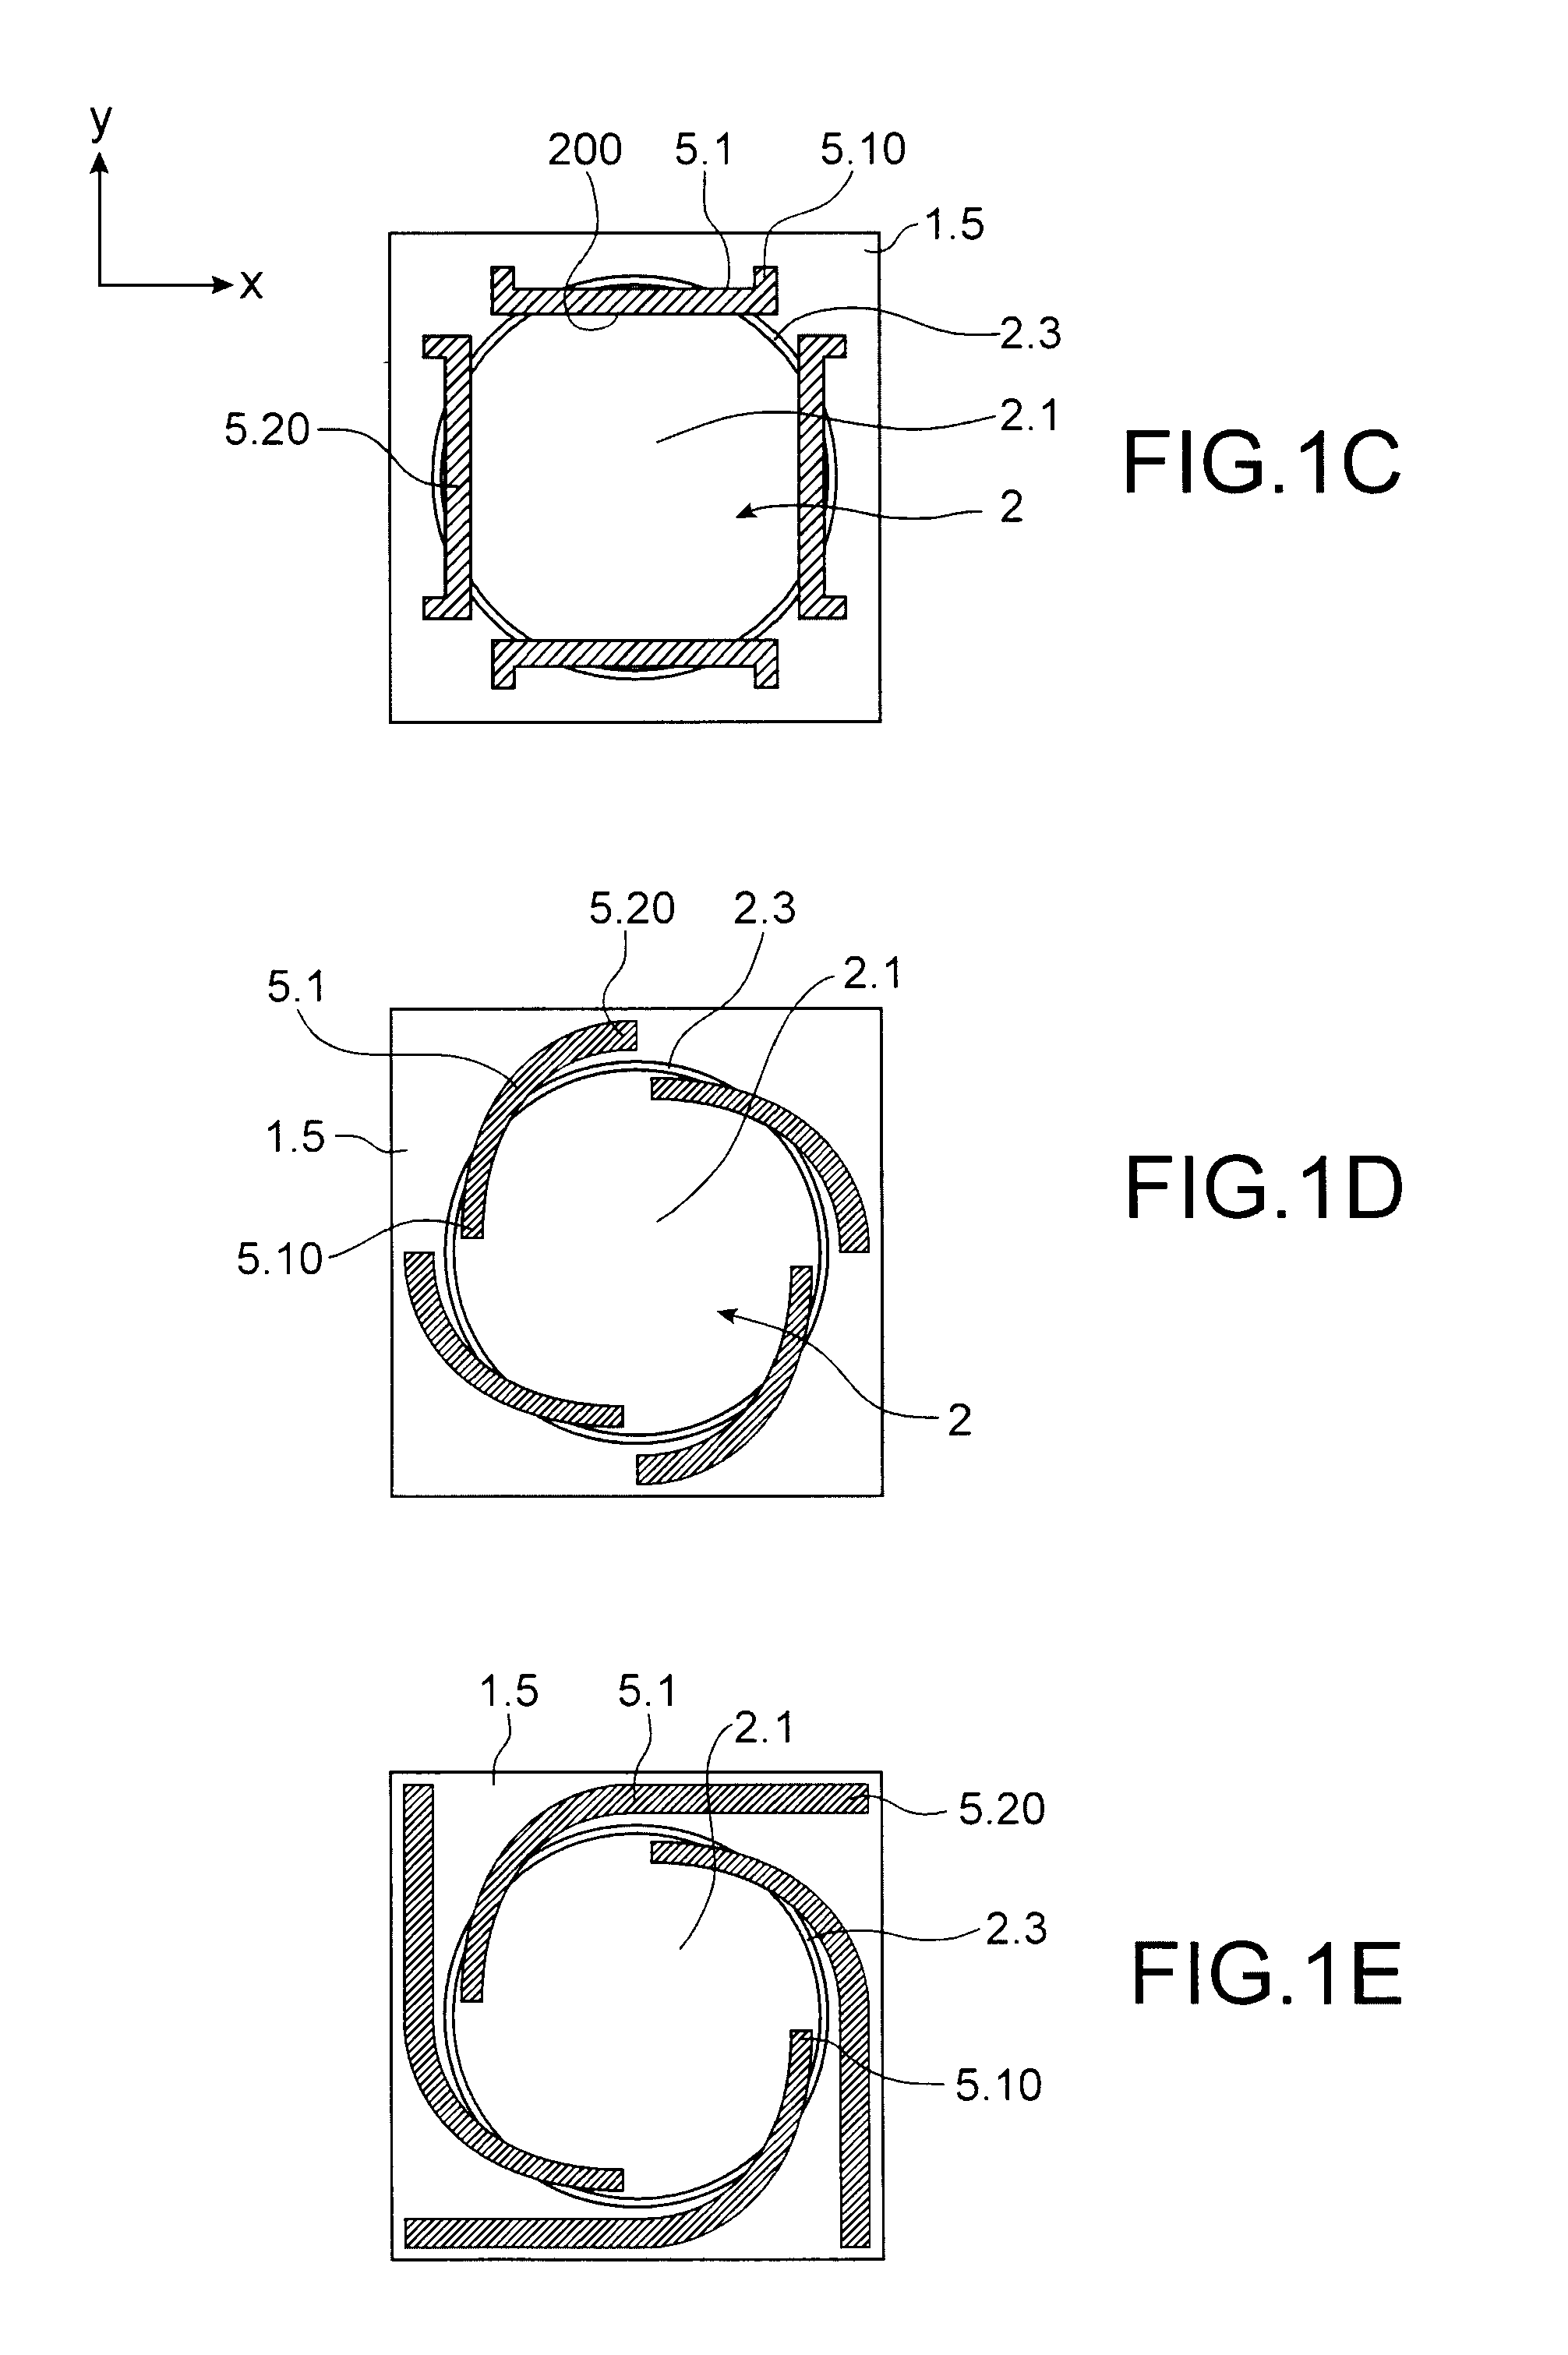 Optical device with means of actuating a compact deformable membrane